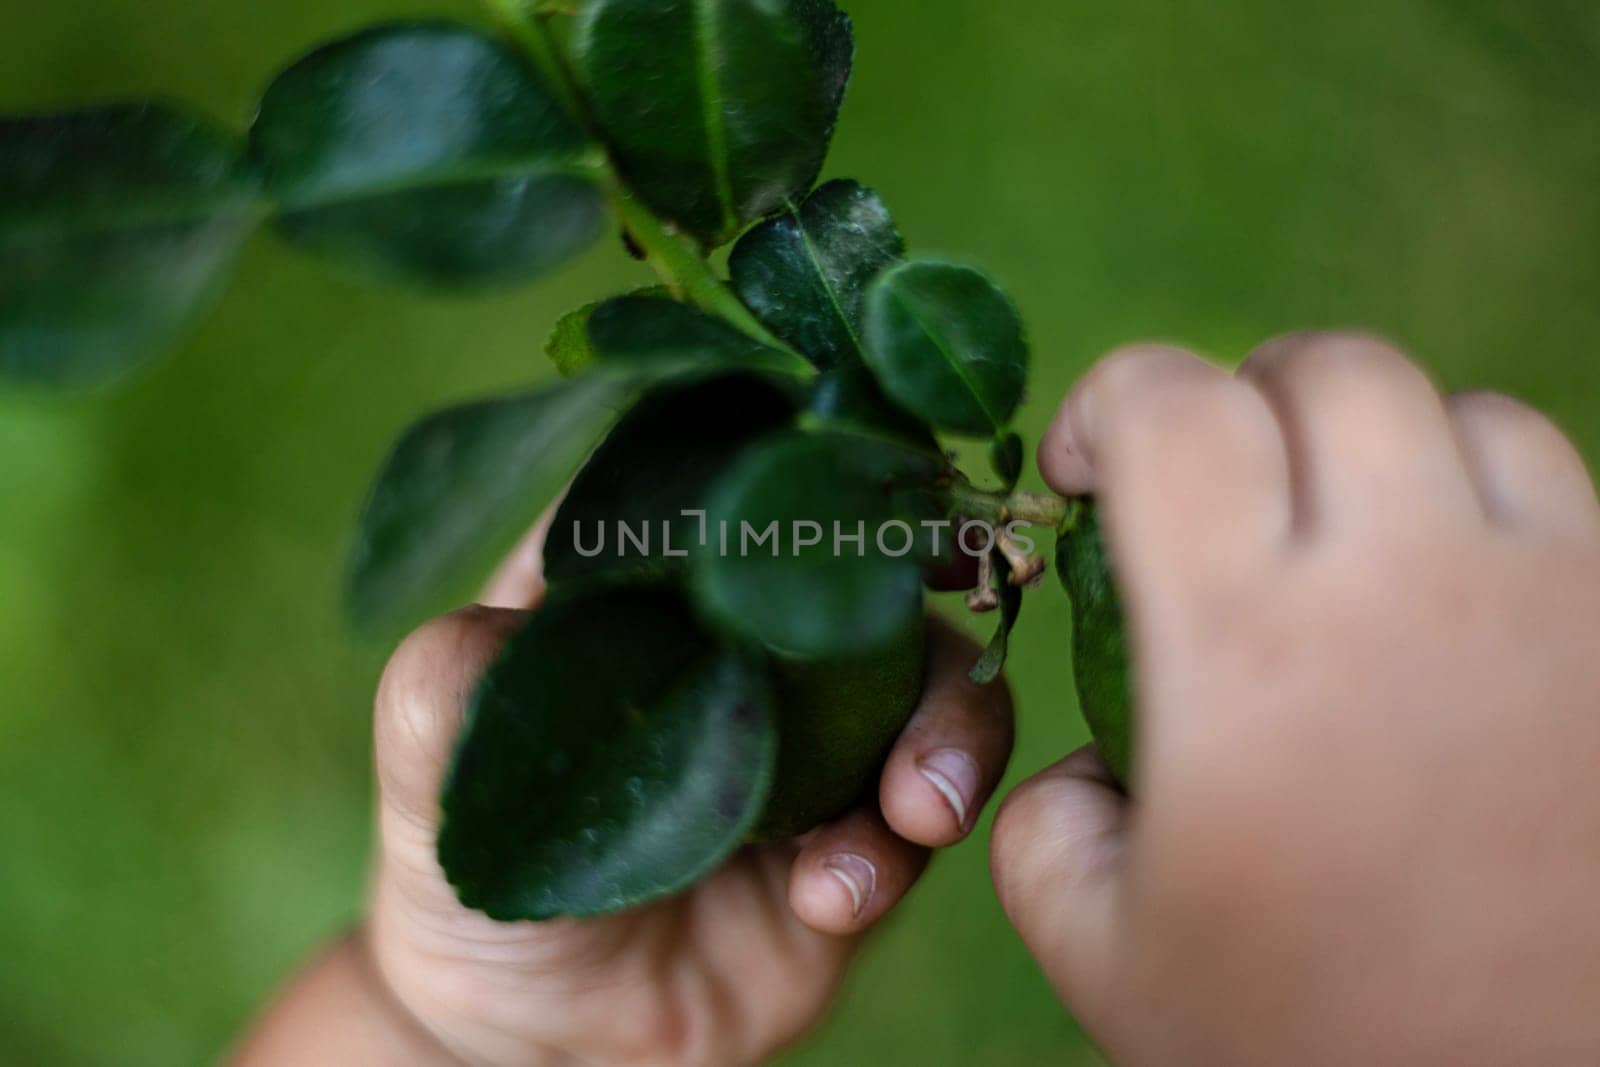 Close Up Of Hand Reaching To Pick Fruit From Tree. Picking lemons from a lemon tree.